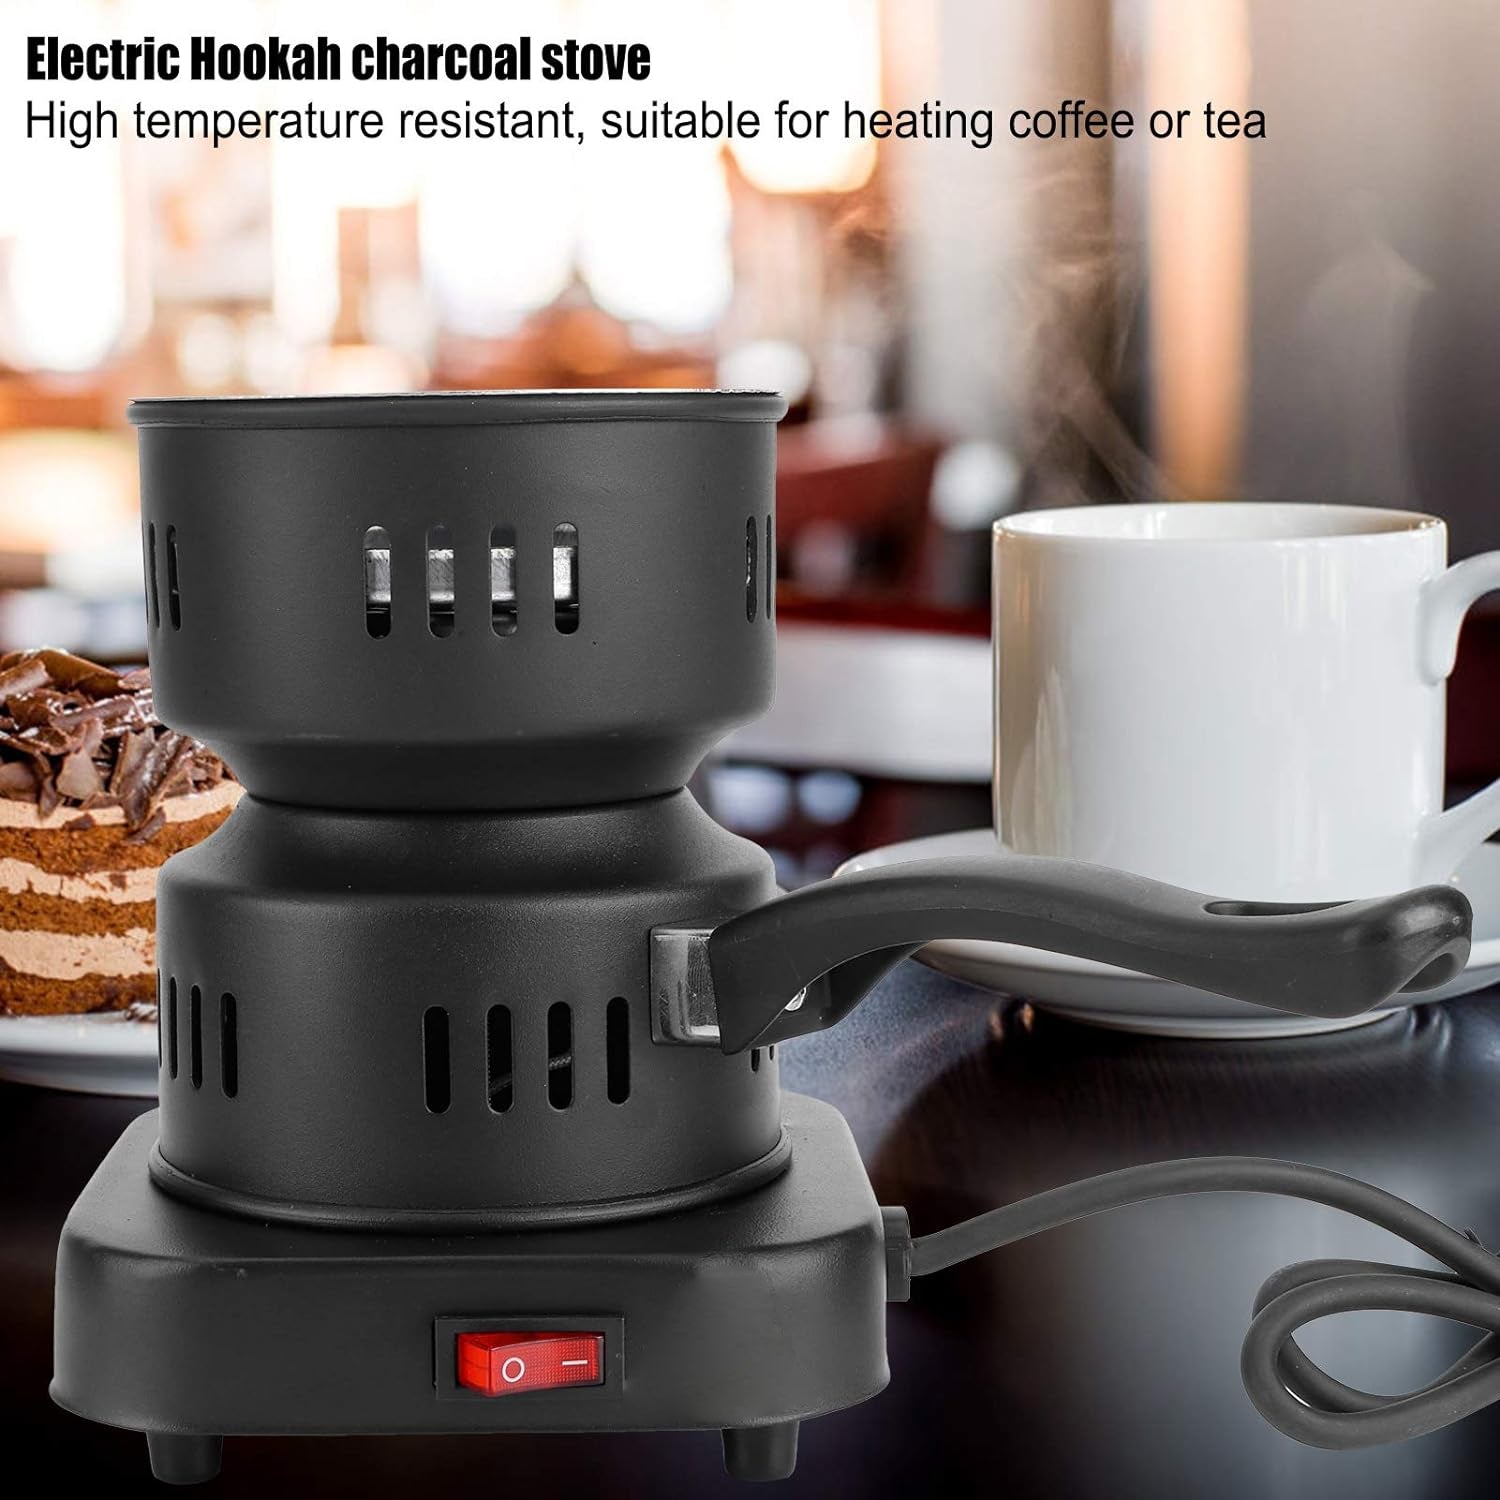 5815 Heating Stove, Tubular Heating Stove Hot Plate Stove,  Heat‑Resistant Coating for Home, Camping Cooking, Mini Electric Tea Coffee Heater